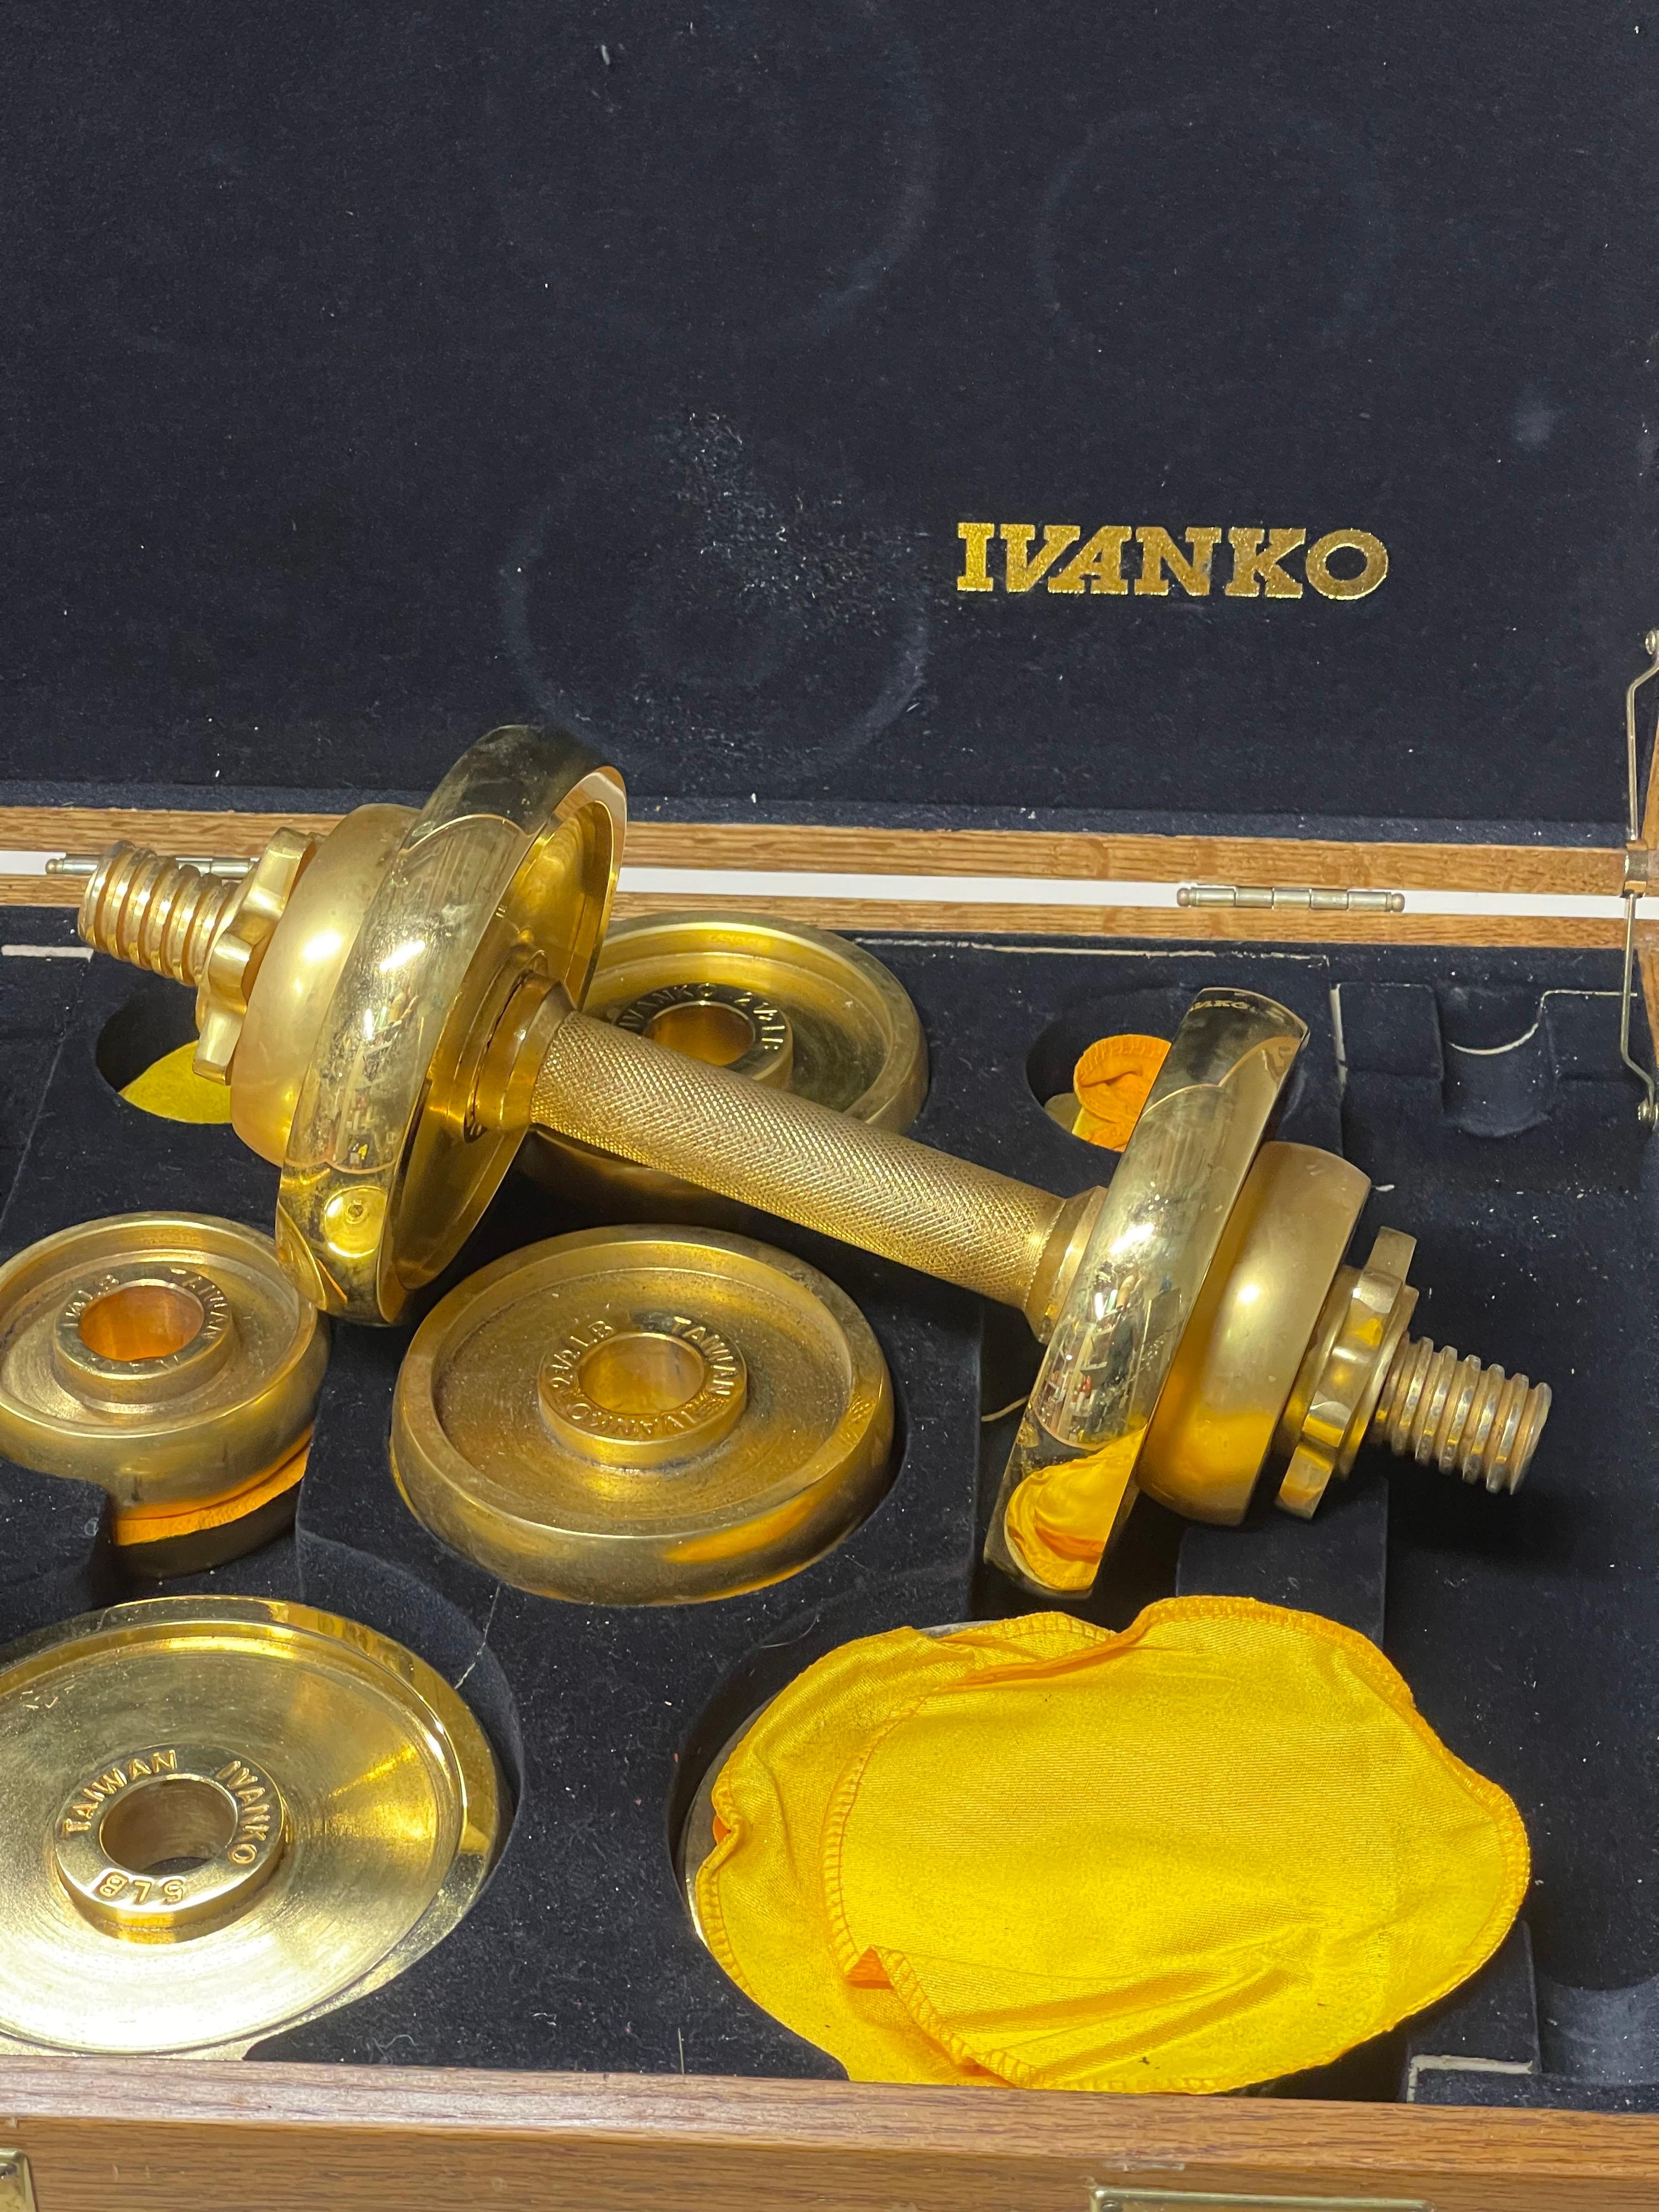 1980’s Ivanko 22 Karat Gold Plated Weight Set For Sale 2